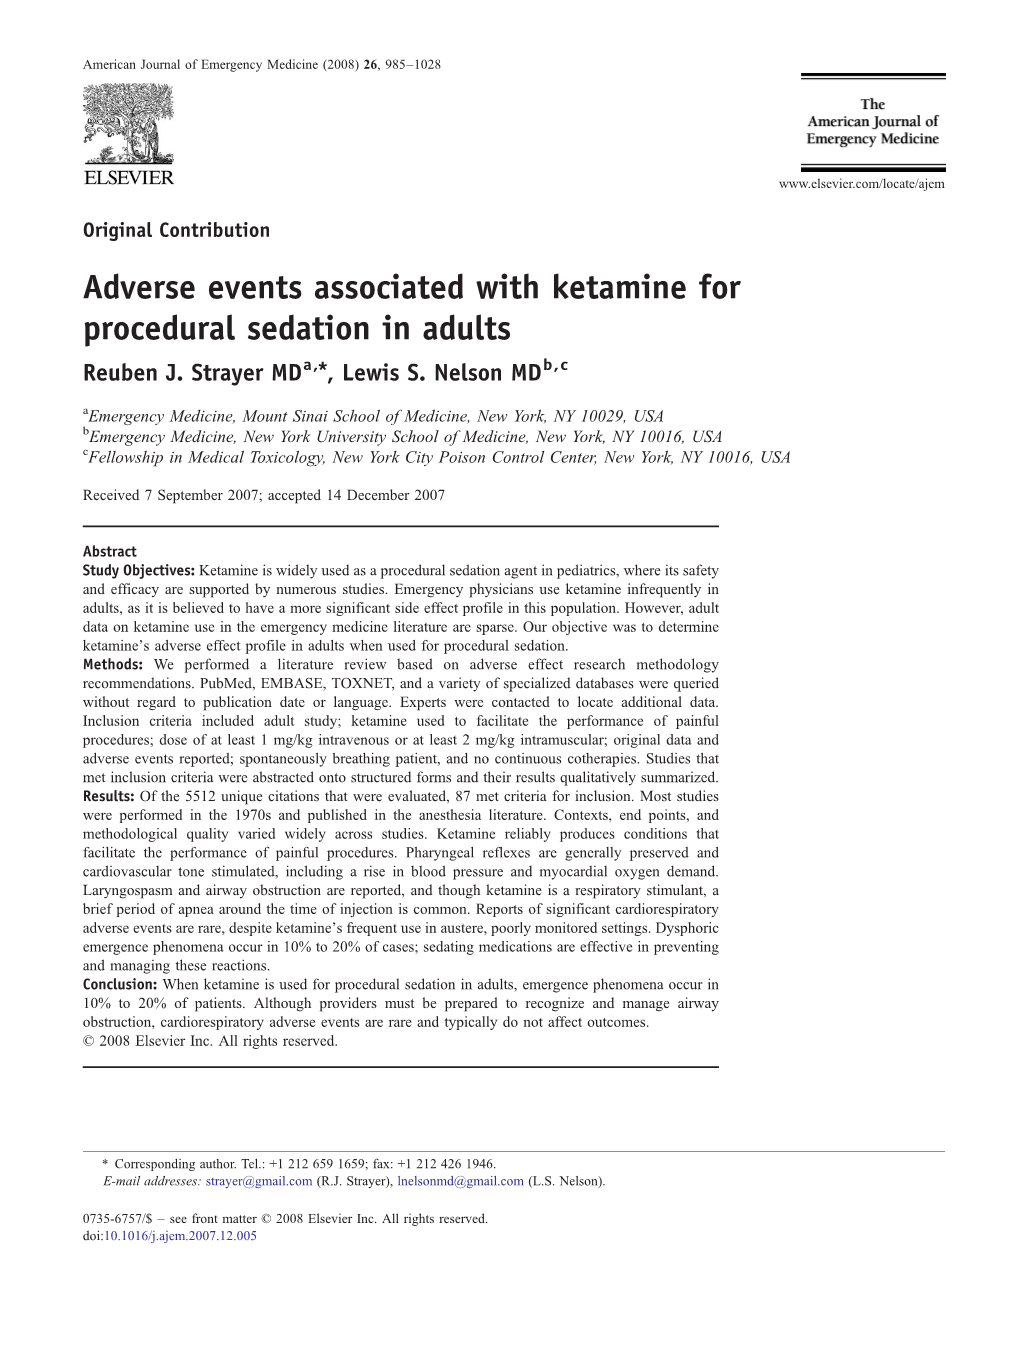 Adverse Events Associated with Ketamine for Procedural Sedation in Adults Reuben J